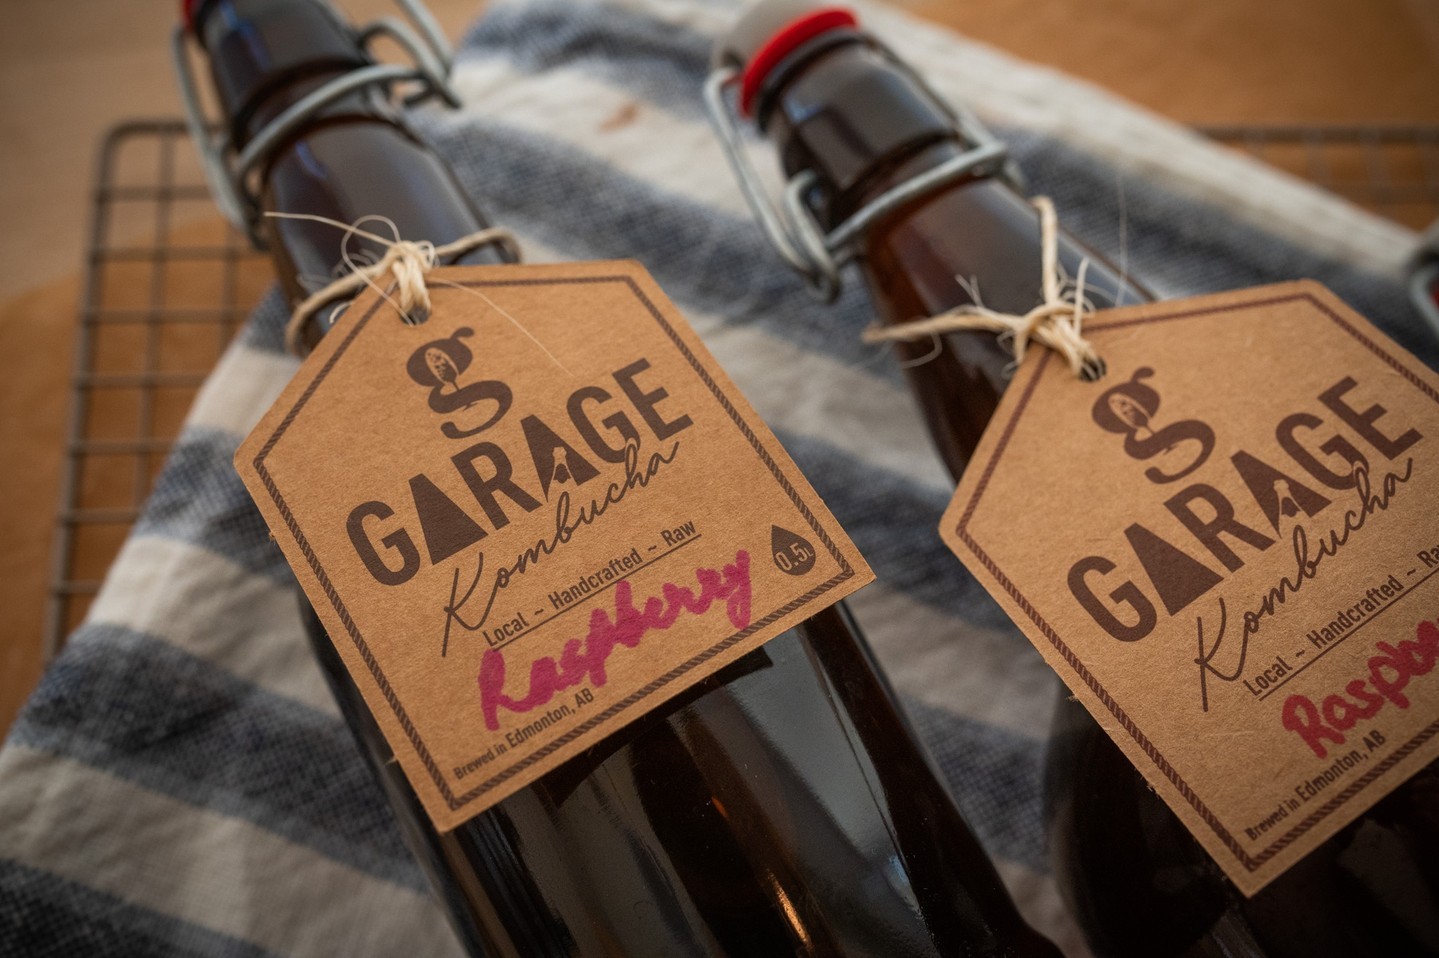 Mark your calendars! This Saturday, Garage Kombucha will be in store, demoing their delicious kombucha. Brewed with patience, love, and attention, Garage Kombucha is dedicated to making kombucha nutritious and reliably delicious, using only selected simple ingredients, premium quality tea, and sufficient fermentation time!